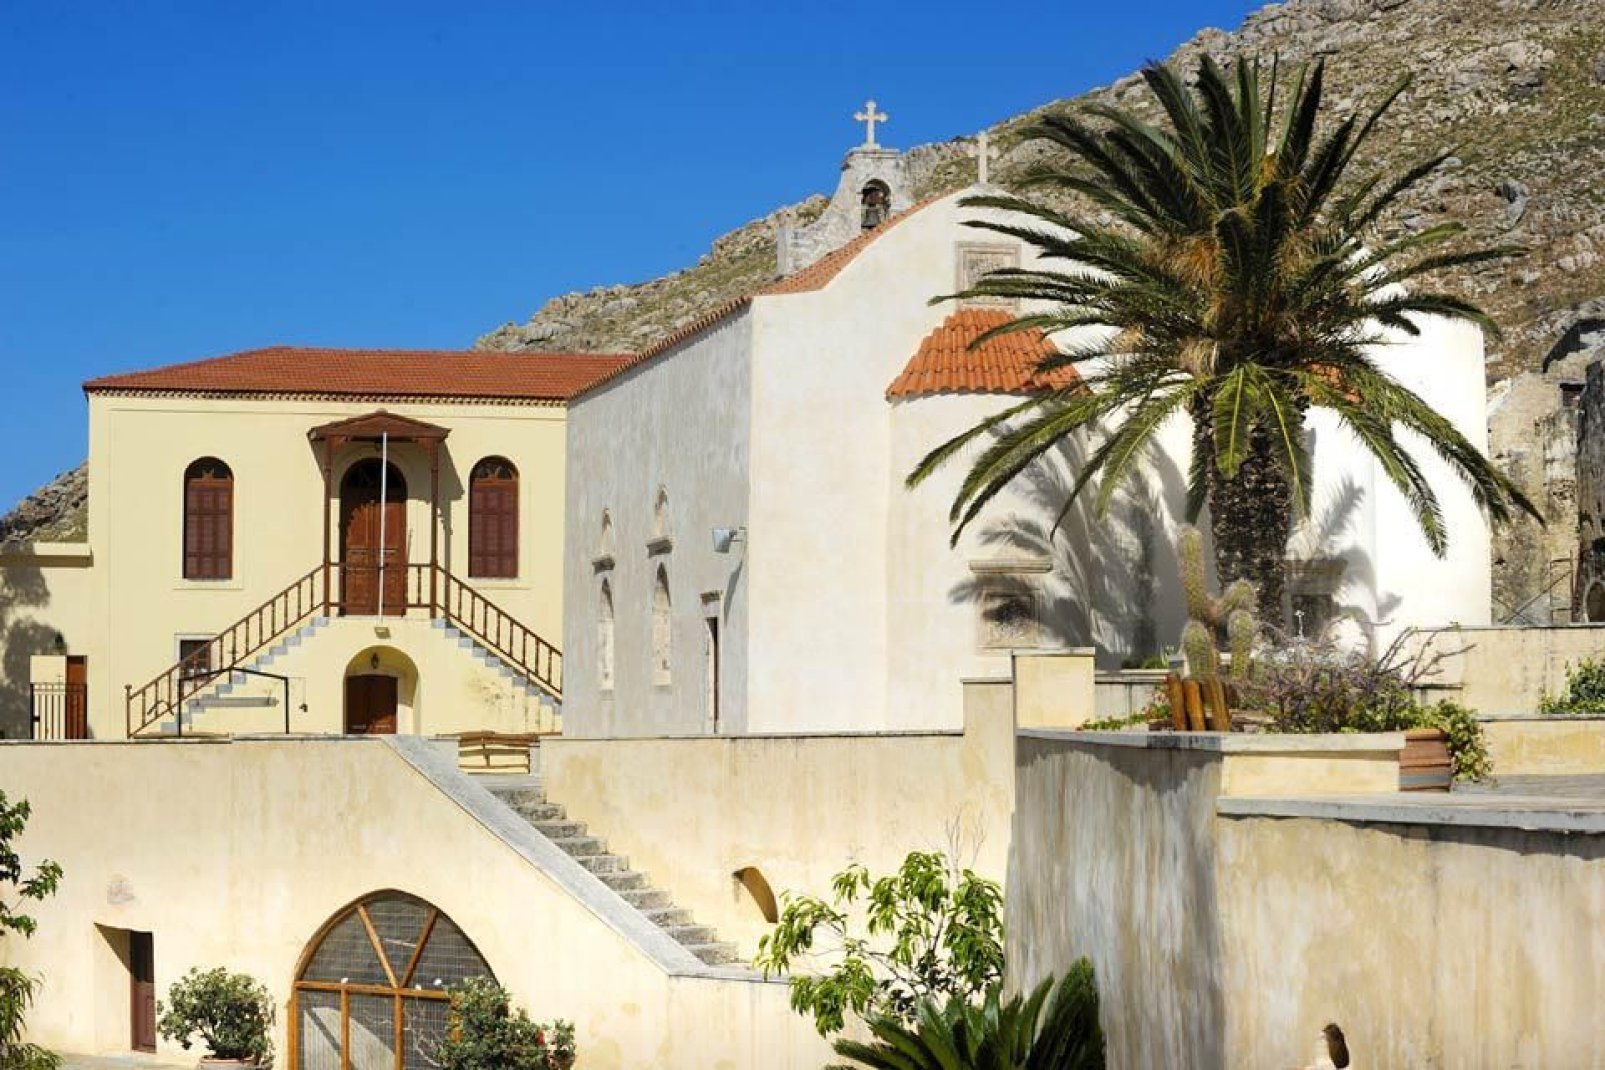 This monastery facing the sea holds a precious relic of the Holy Cross. There is also a museum that is open to visitors.